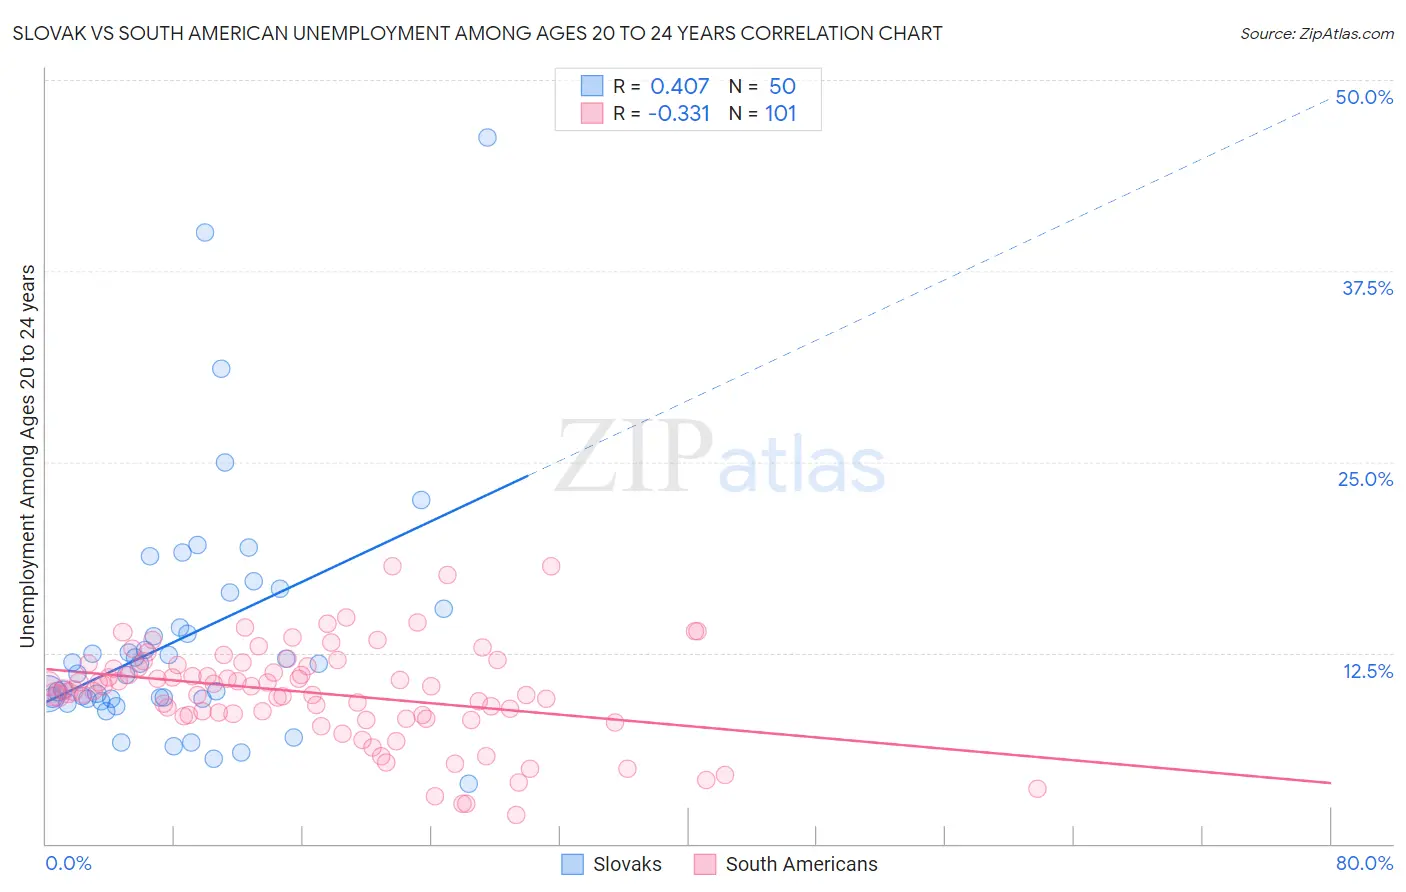 Slovak vs South American Unemployment Among Ages 20 to 24 years